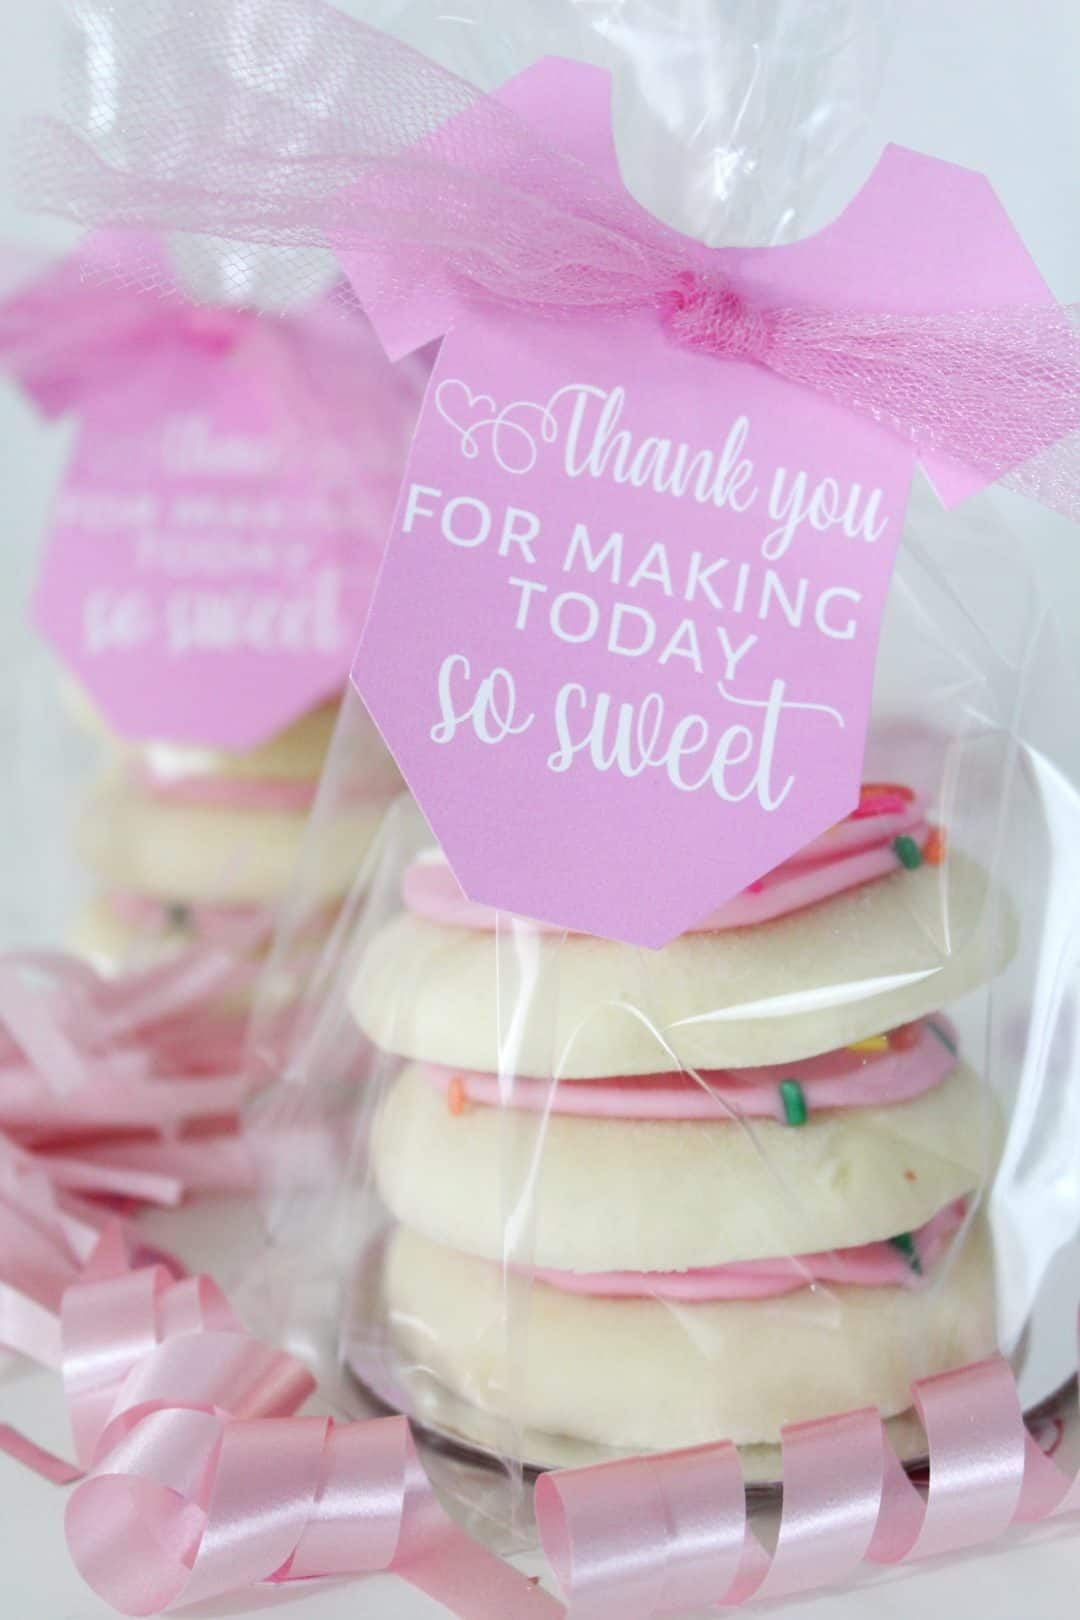 Baby Shower Return Gift Ideas For Guests
 Baby Shower Favor Ideas